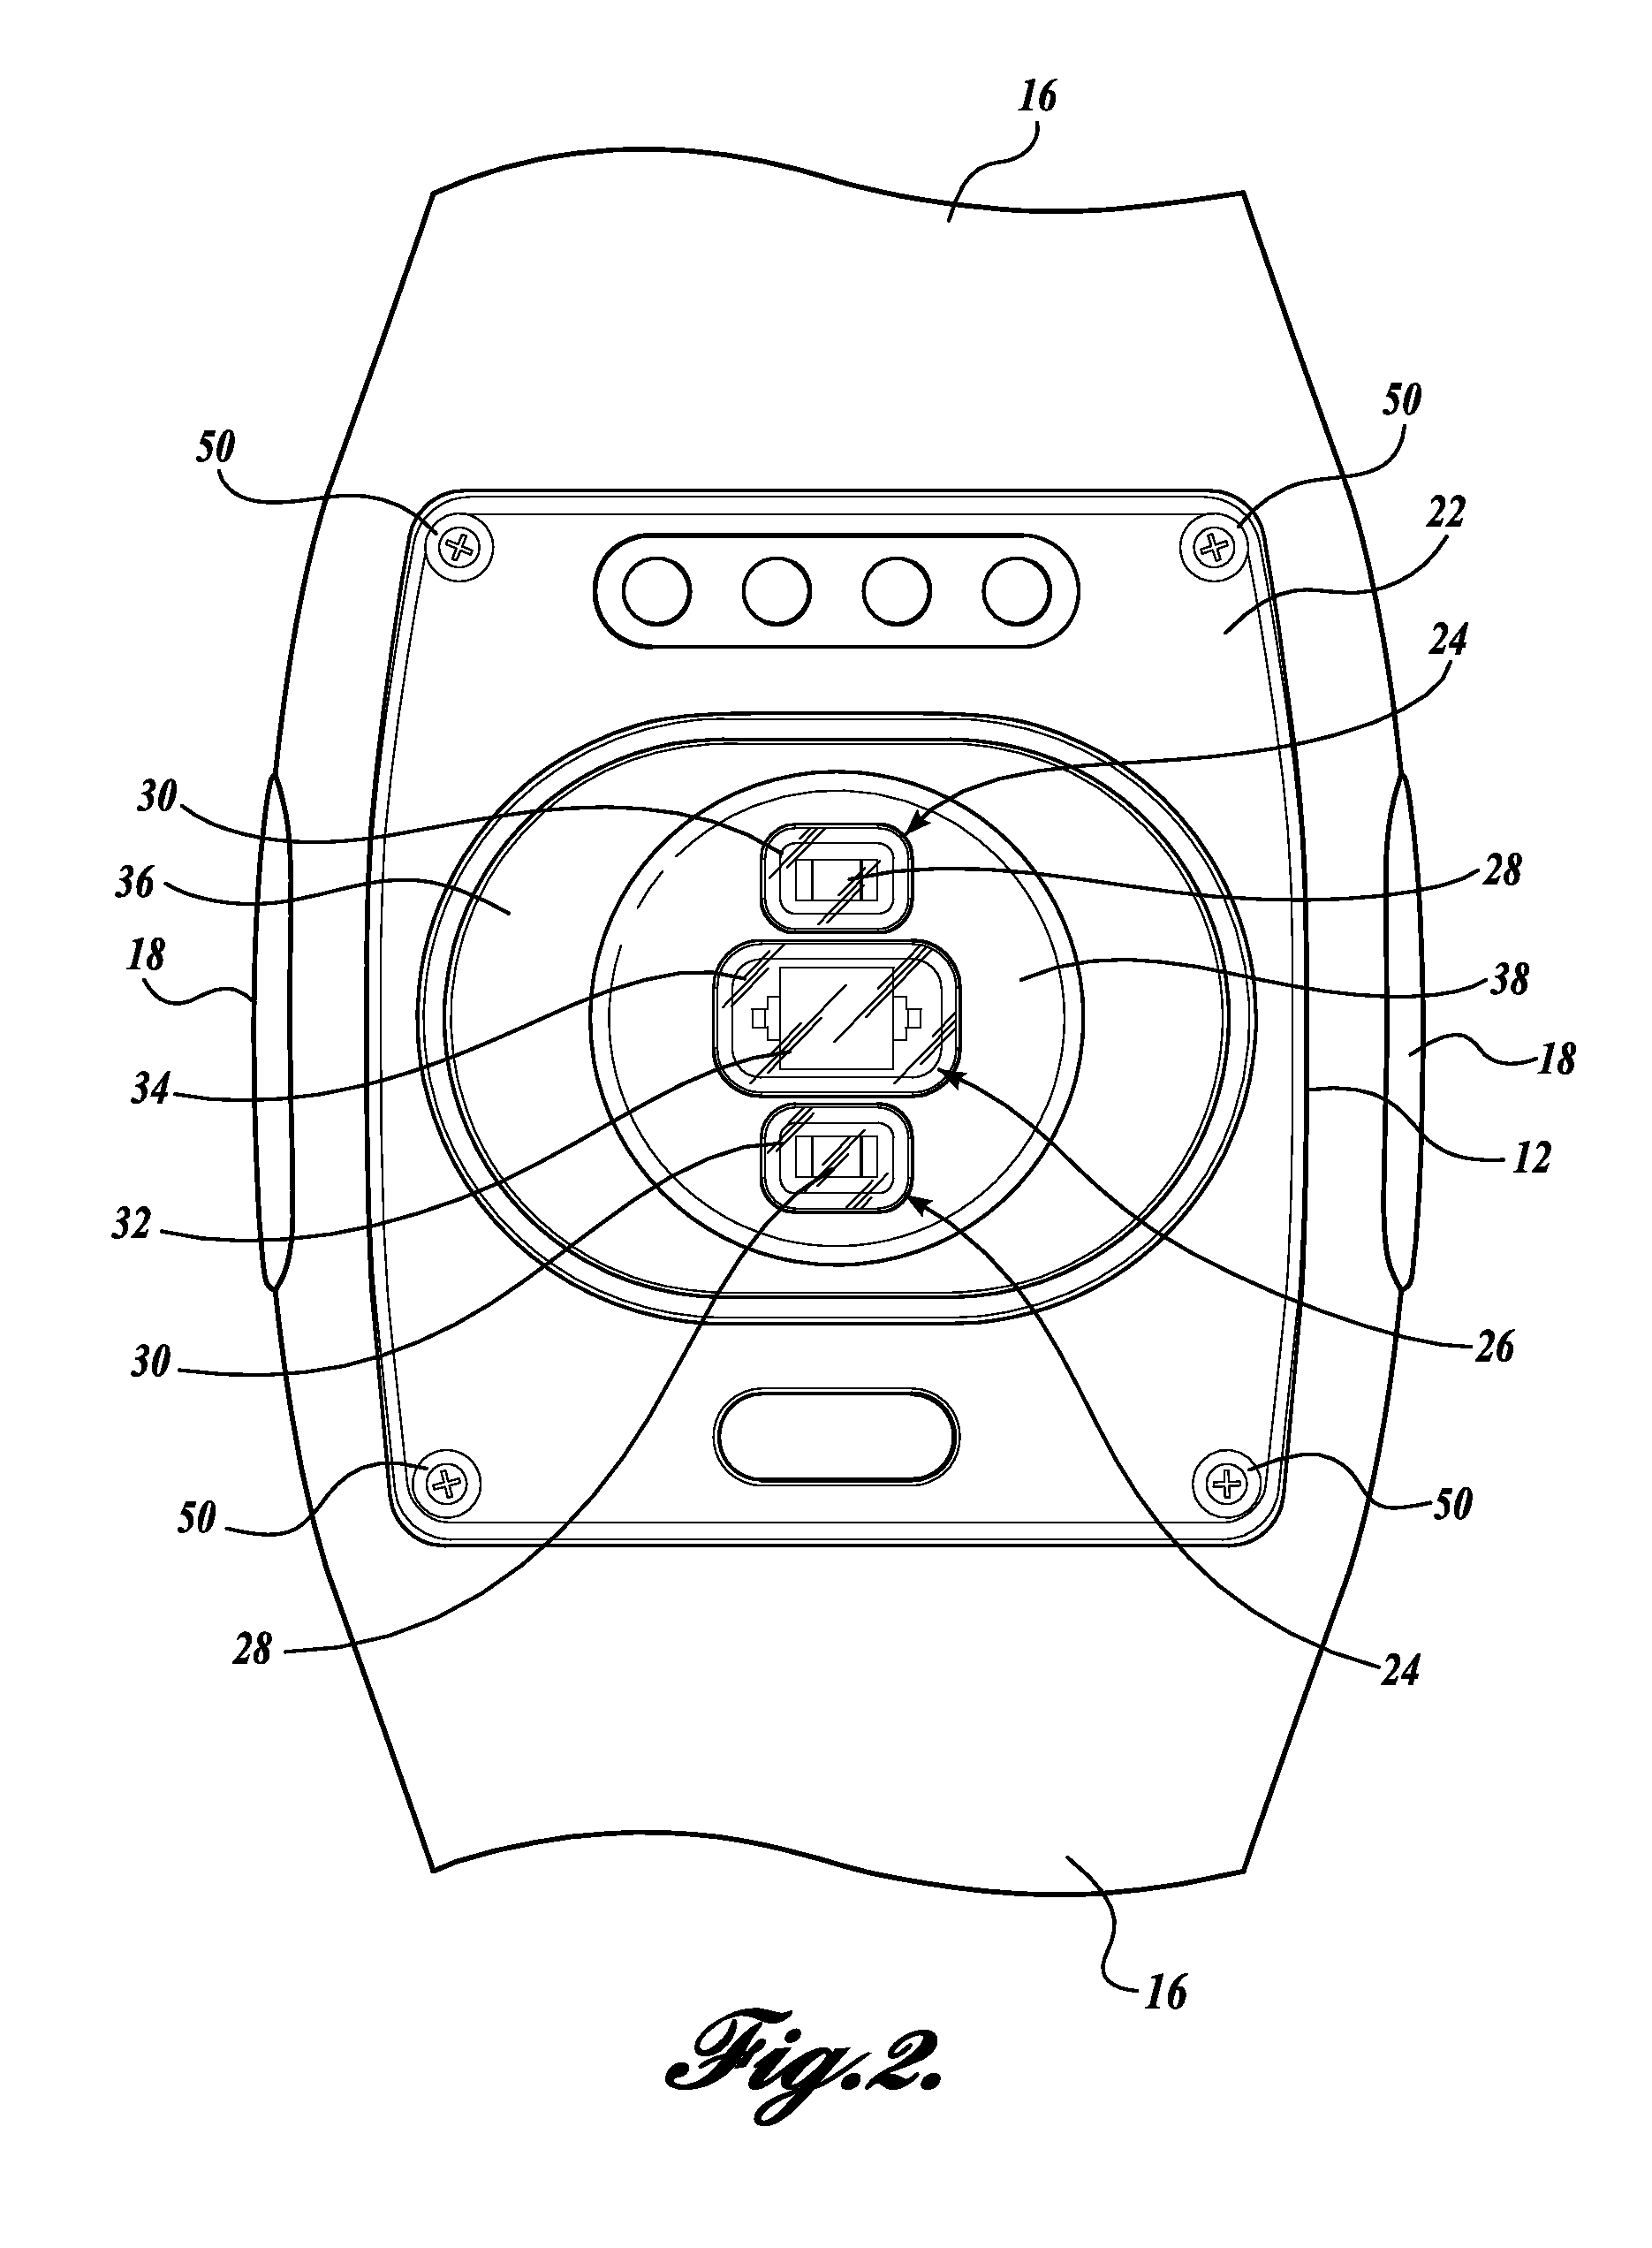 Systems and Methods for Optical Sensor Arrangements